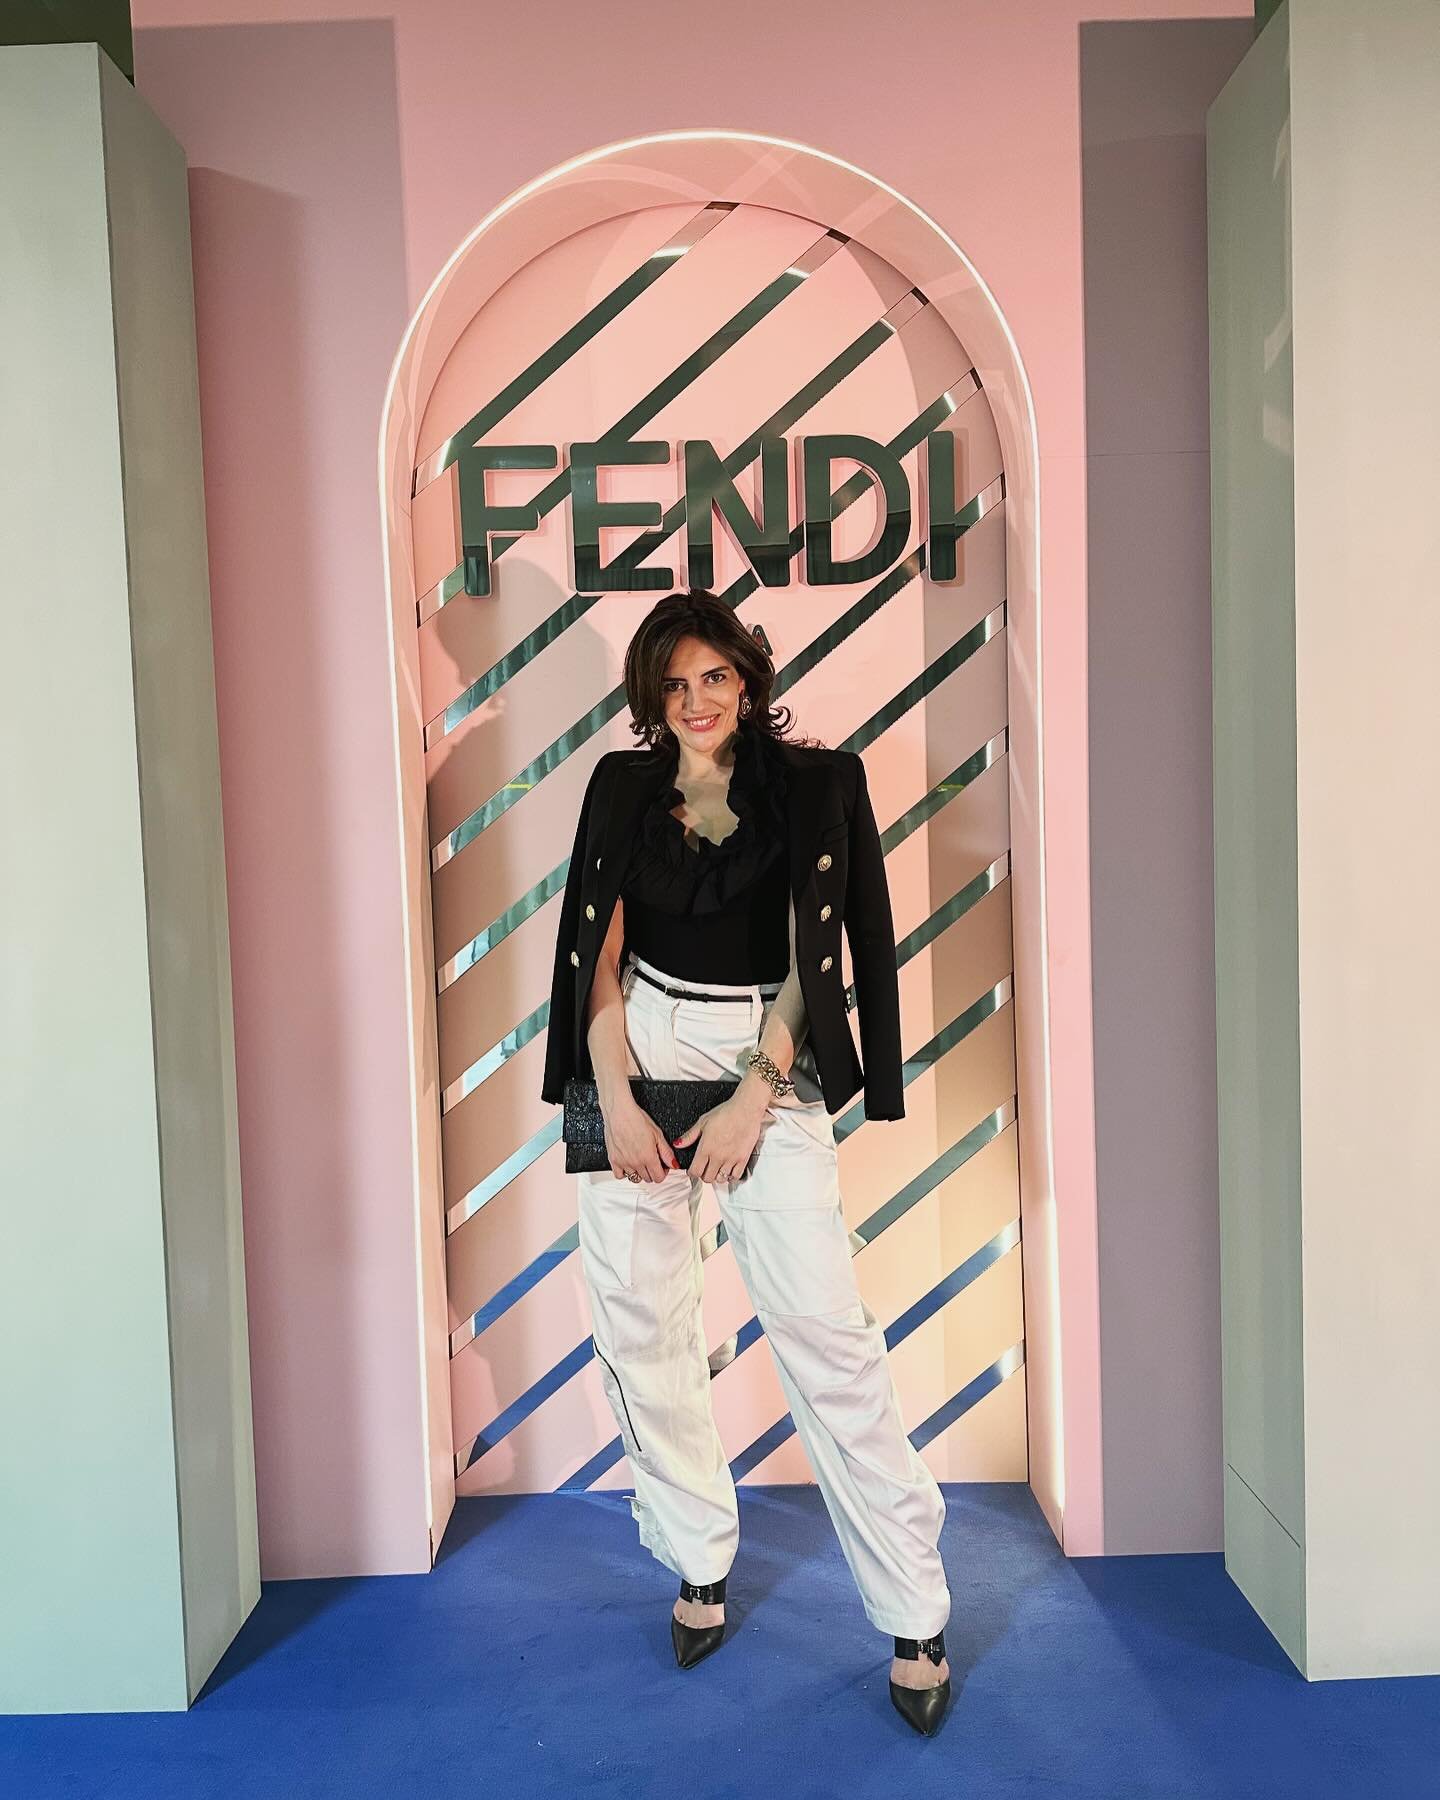 World of Fendi BTS ✨ 
Seeing the artisans crafting at the fendi factory was pretty epic, then the DJ brought the vibes to the warehouse where we danced around the sky high boxes of product ready to ship! That was a pinch me moment!